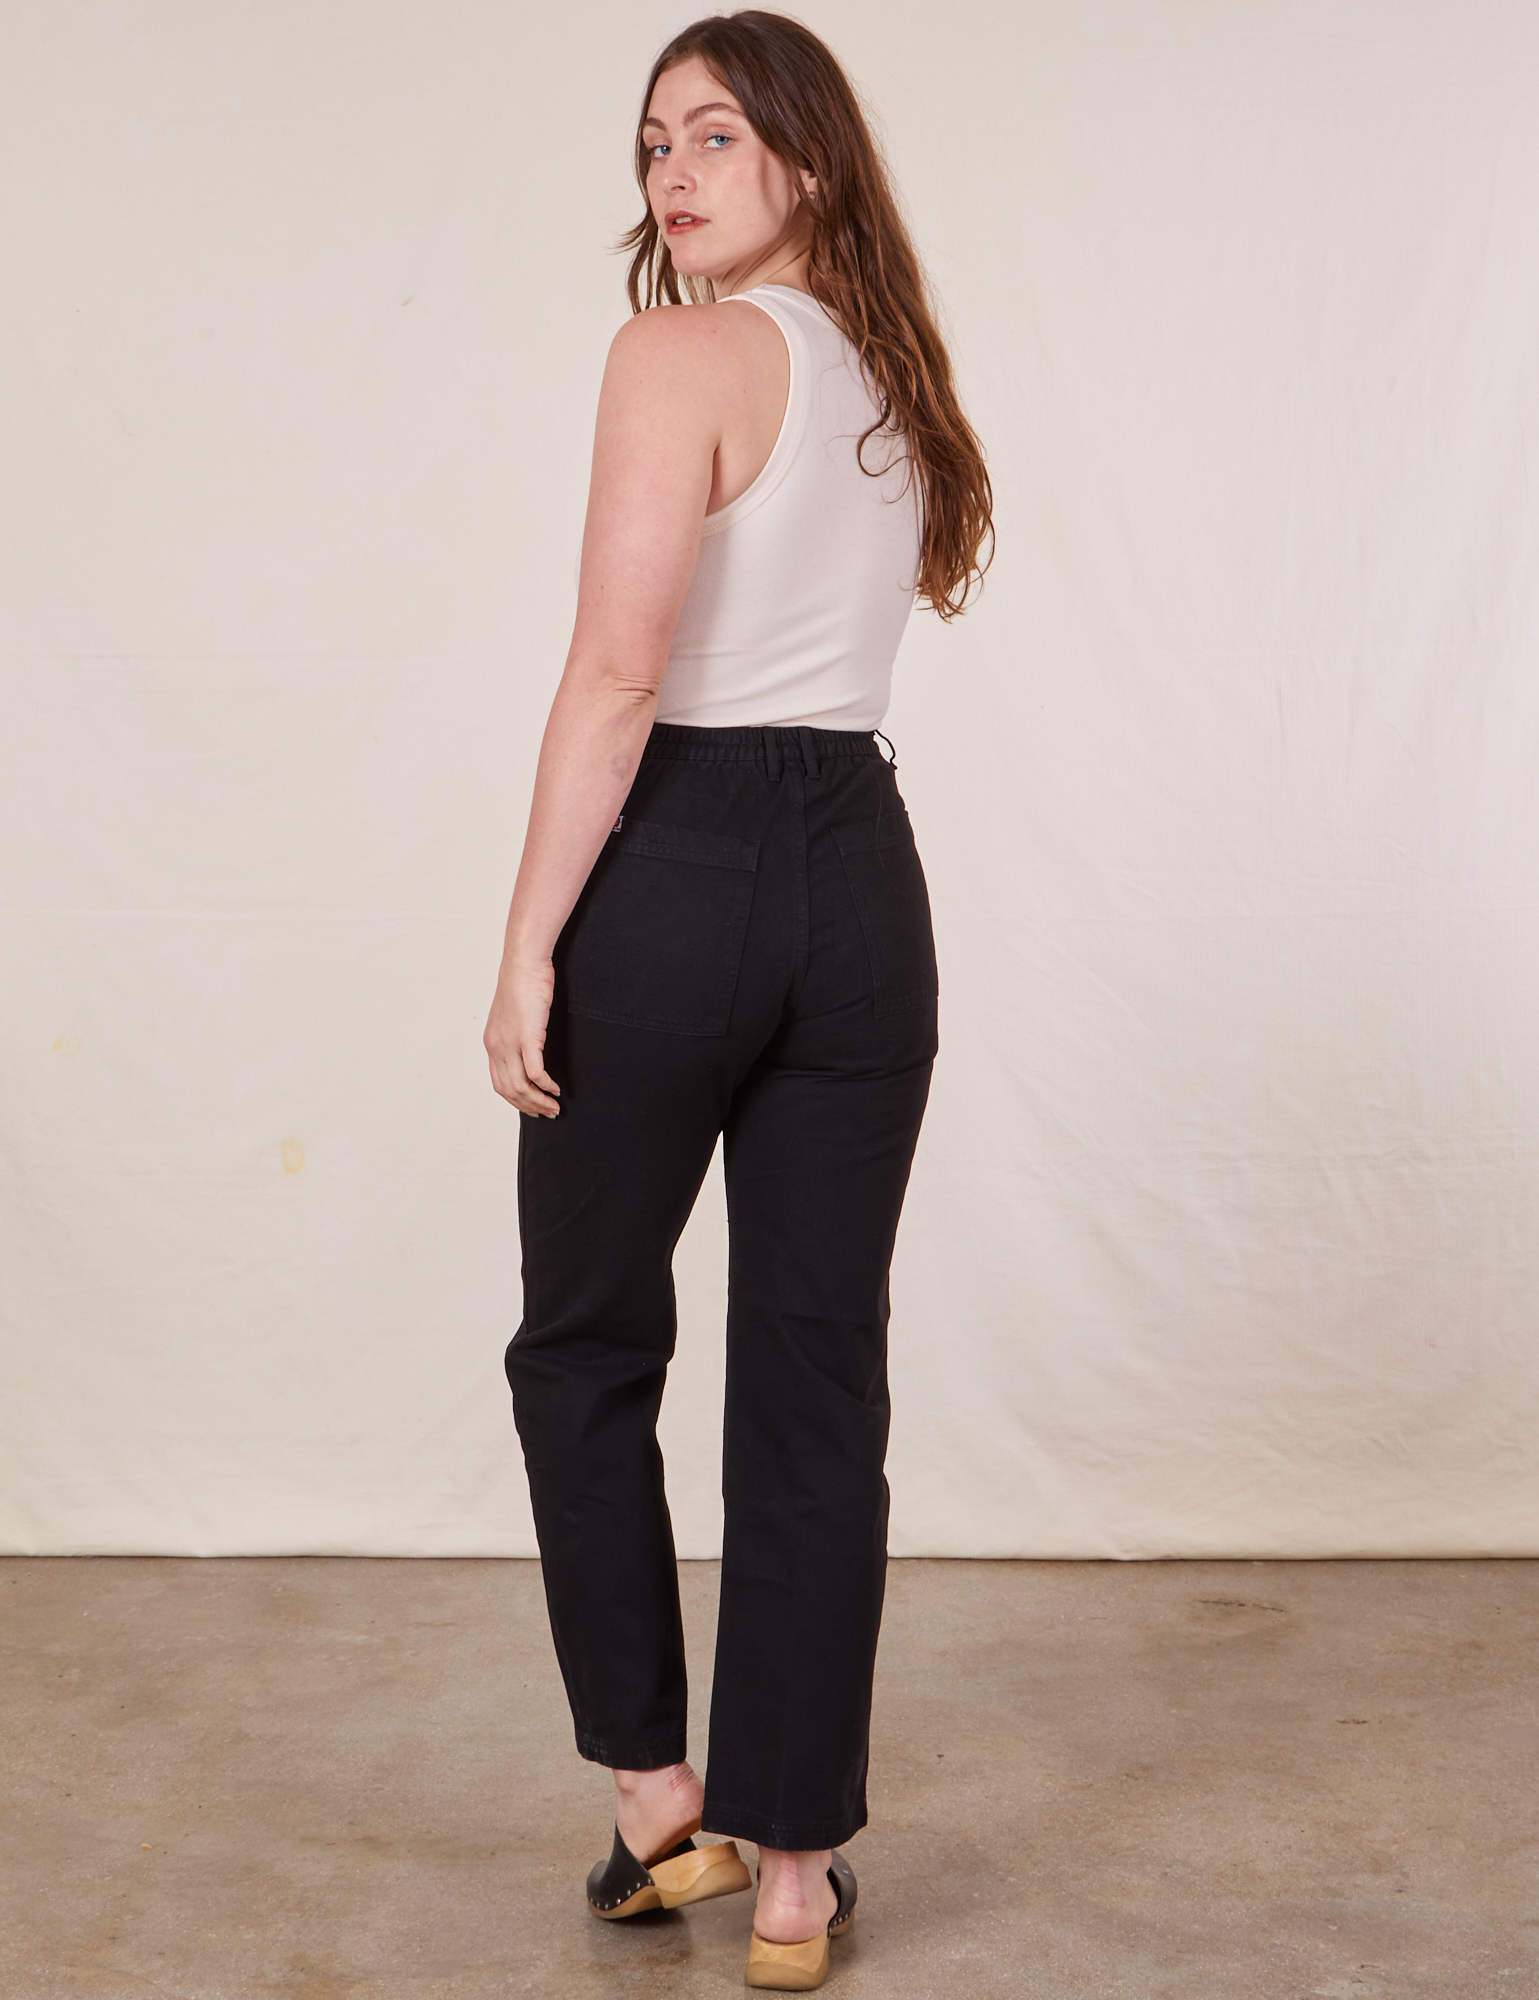 Work Pants in Basic Black back view on Allison wearing a Tank Top in vintage tee off-white